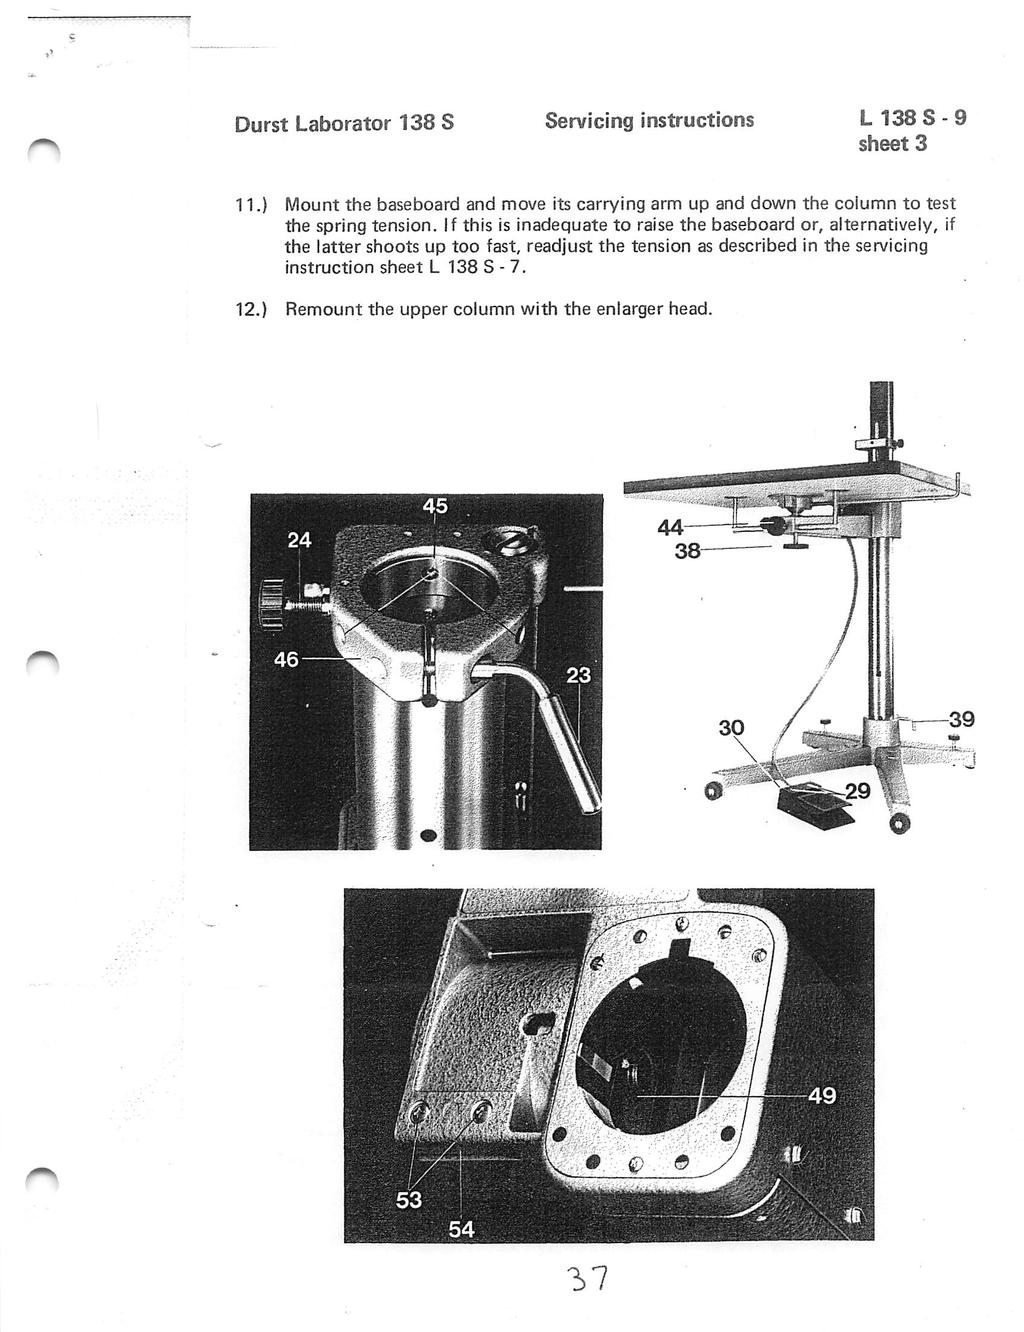 Durst Laborator 138 S Servicing instructions L 1 3 8 S - 9 sheet 3 11.) Mount the baseboard and move its carrying arm up and down the column to test the spring tension.